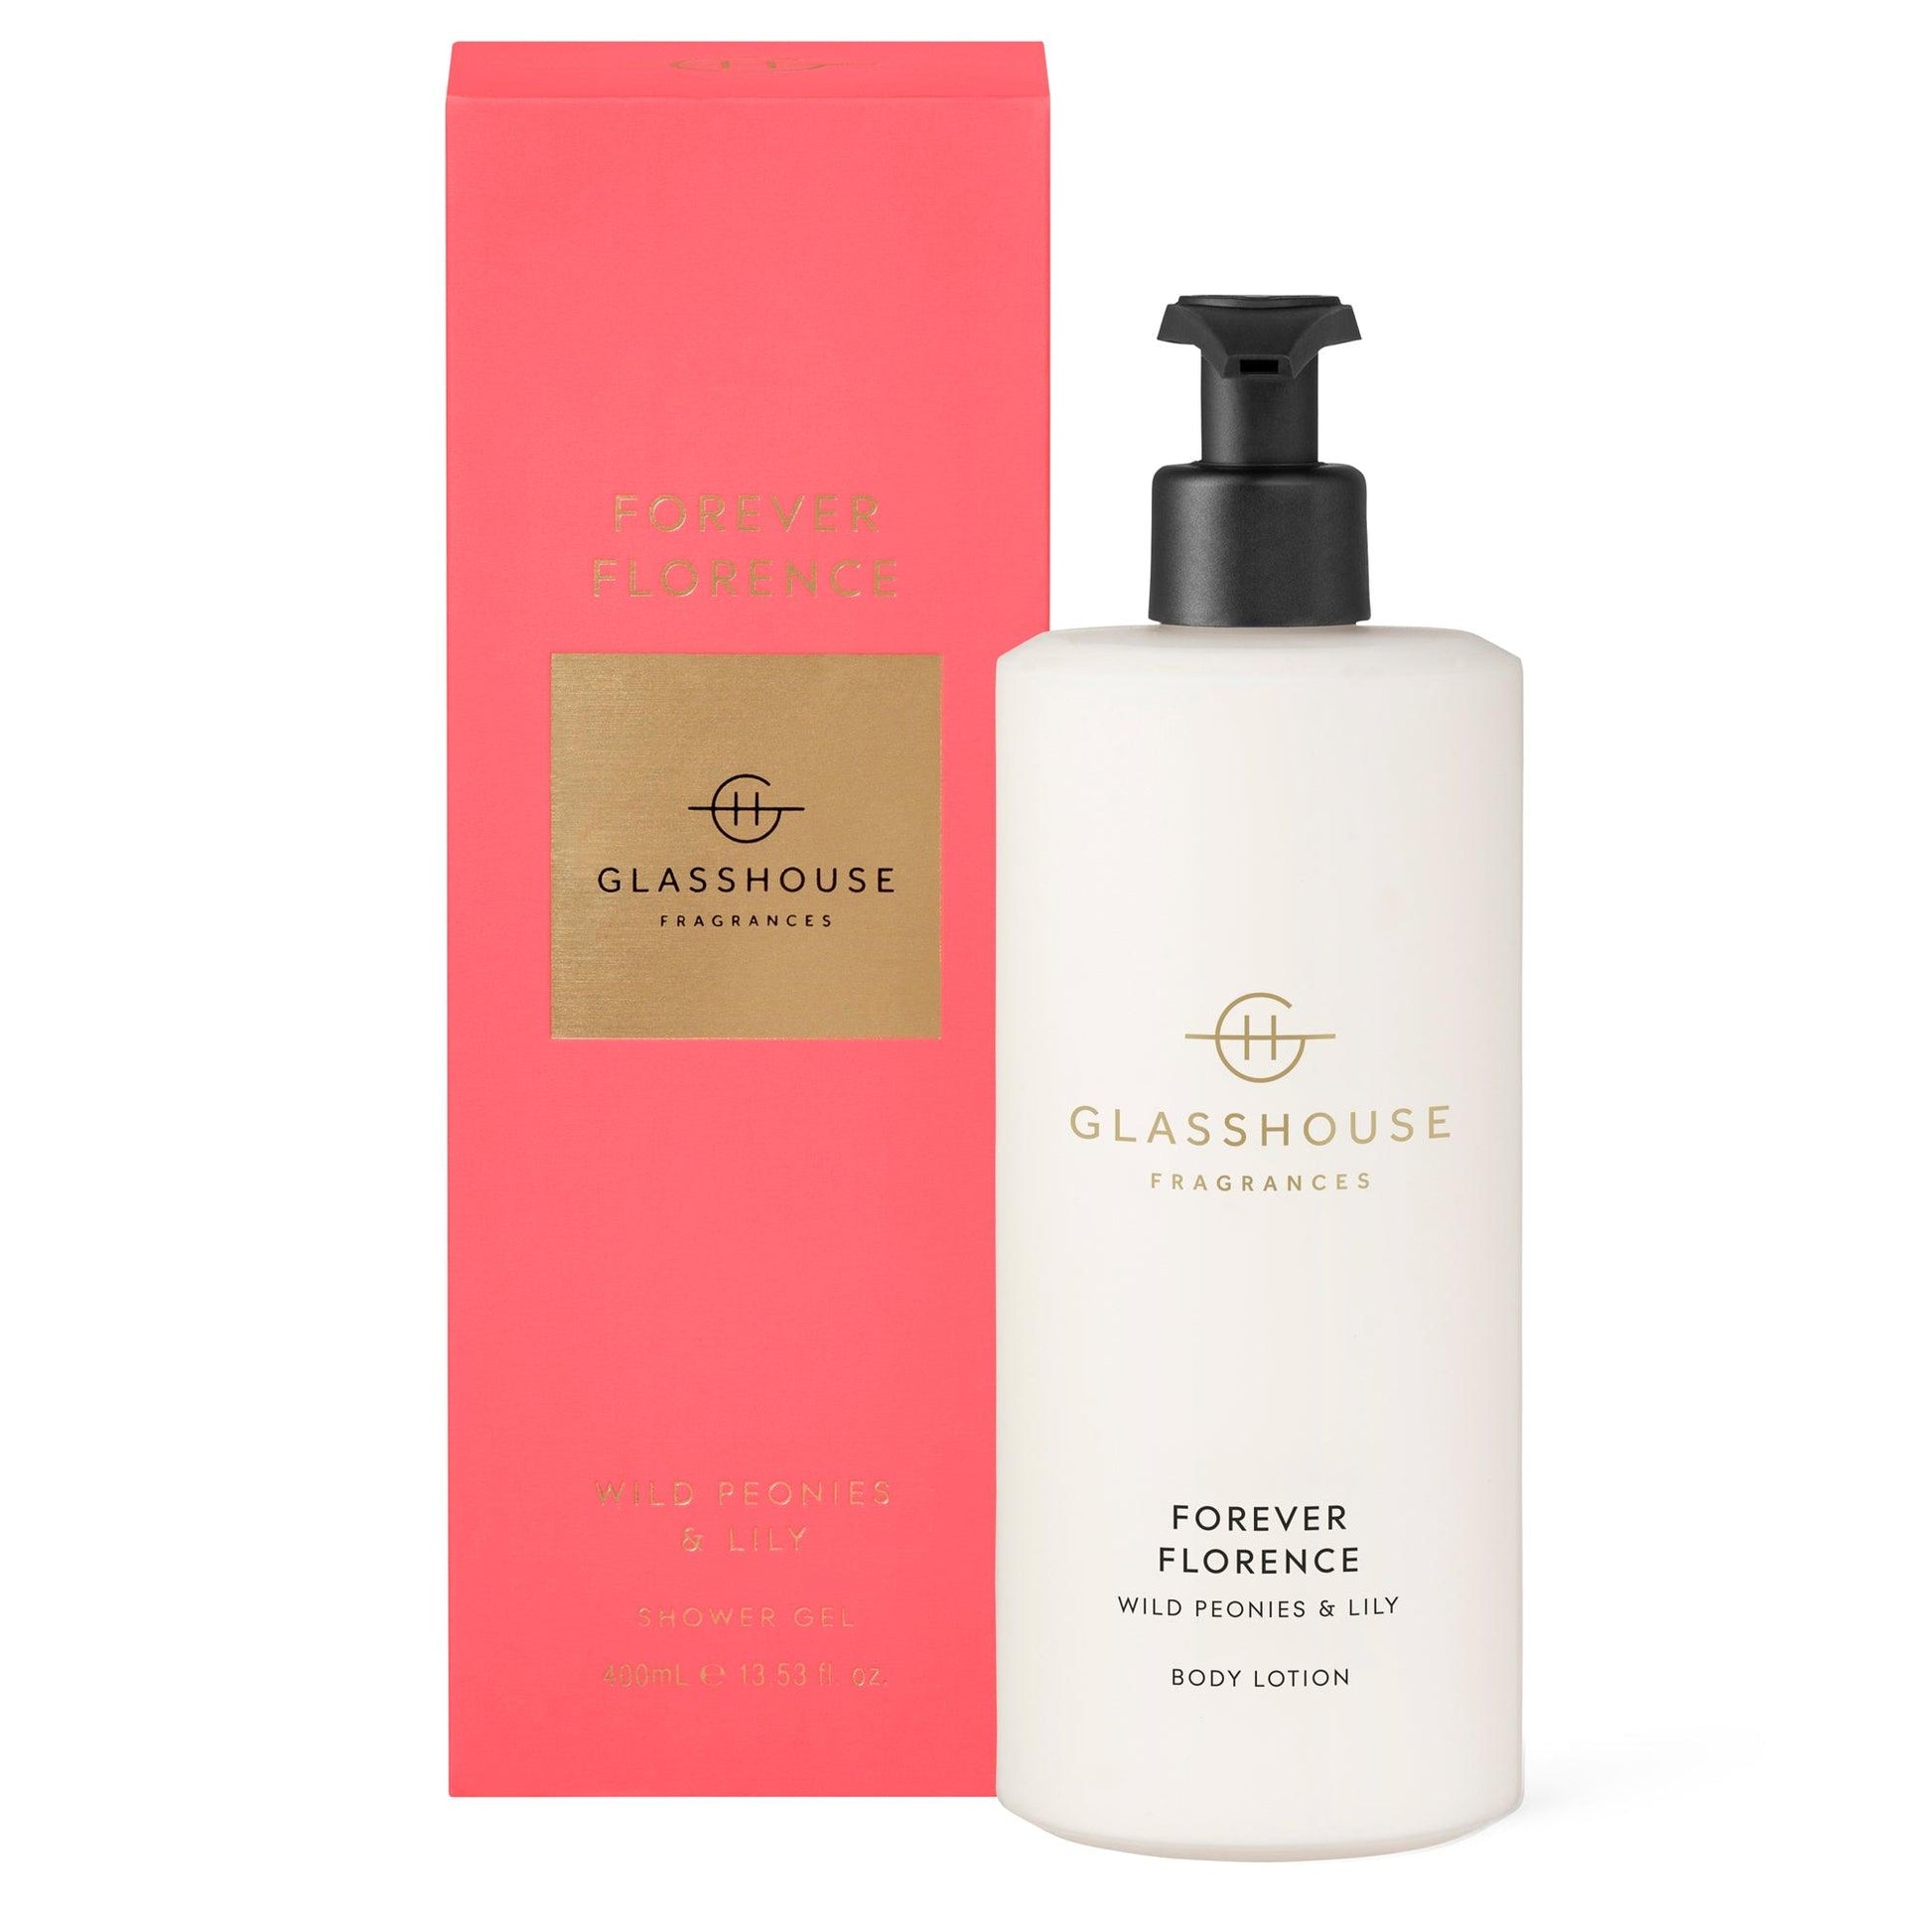 GF 400ml FOREVER FLORENCE Body Lotion - Handworks Nouveau Paperie